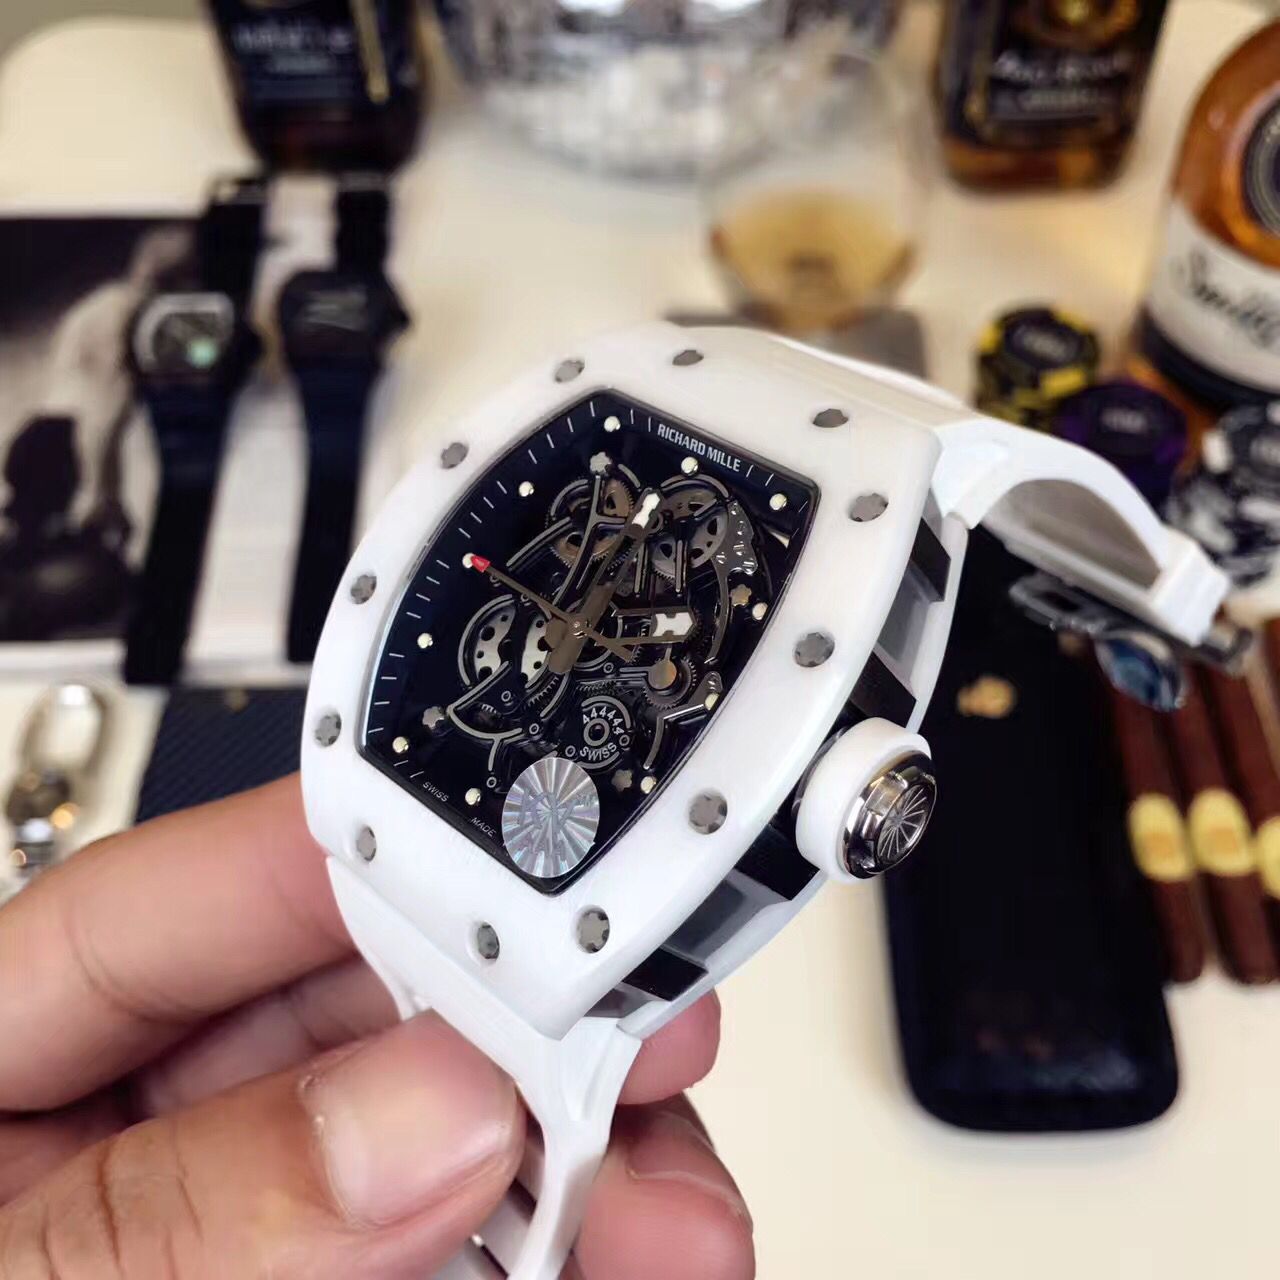 Richard Mille Replica Rm055 Best Edition Swiss Is Not Ceramic